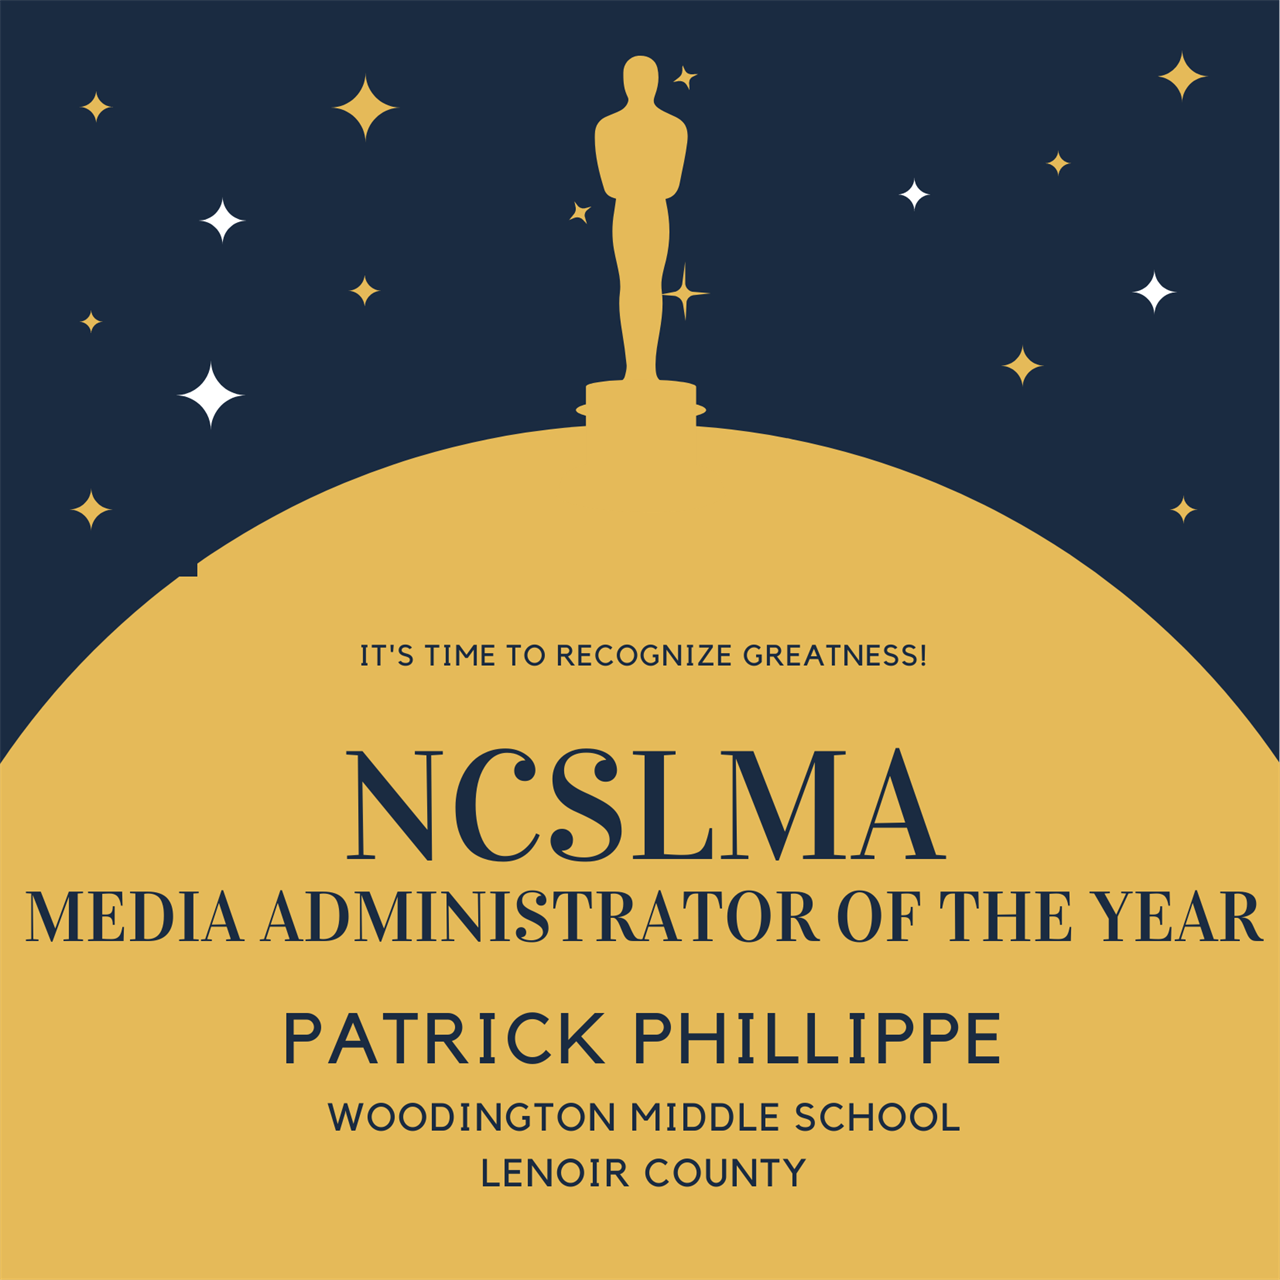 Congratulations to Patirkc Phillippe of Woodington Middle School, the 2021-22 NCSLMA Media Administrator of the Year